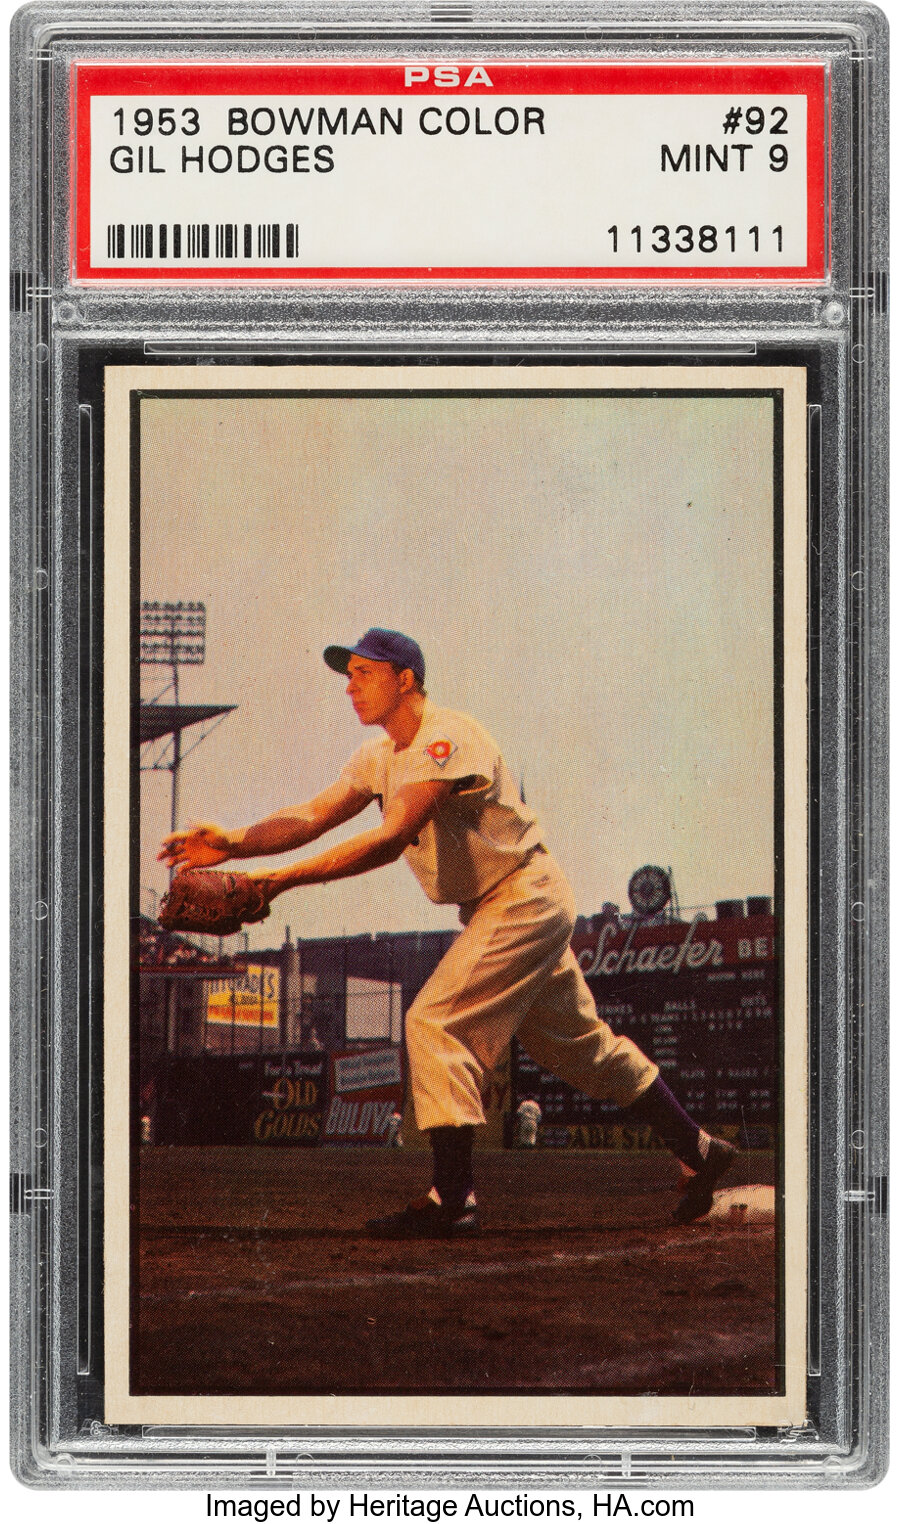 1953 Bowman Gil Hodges #92 PSA Mint 9 - Only One Higher!